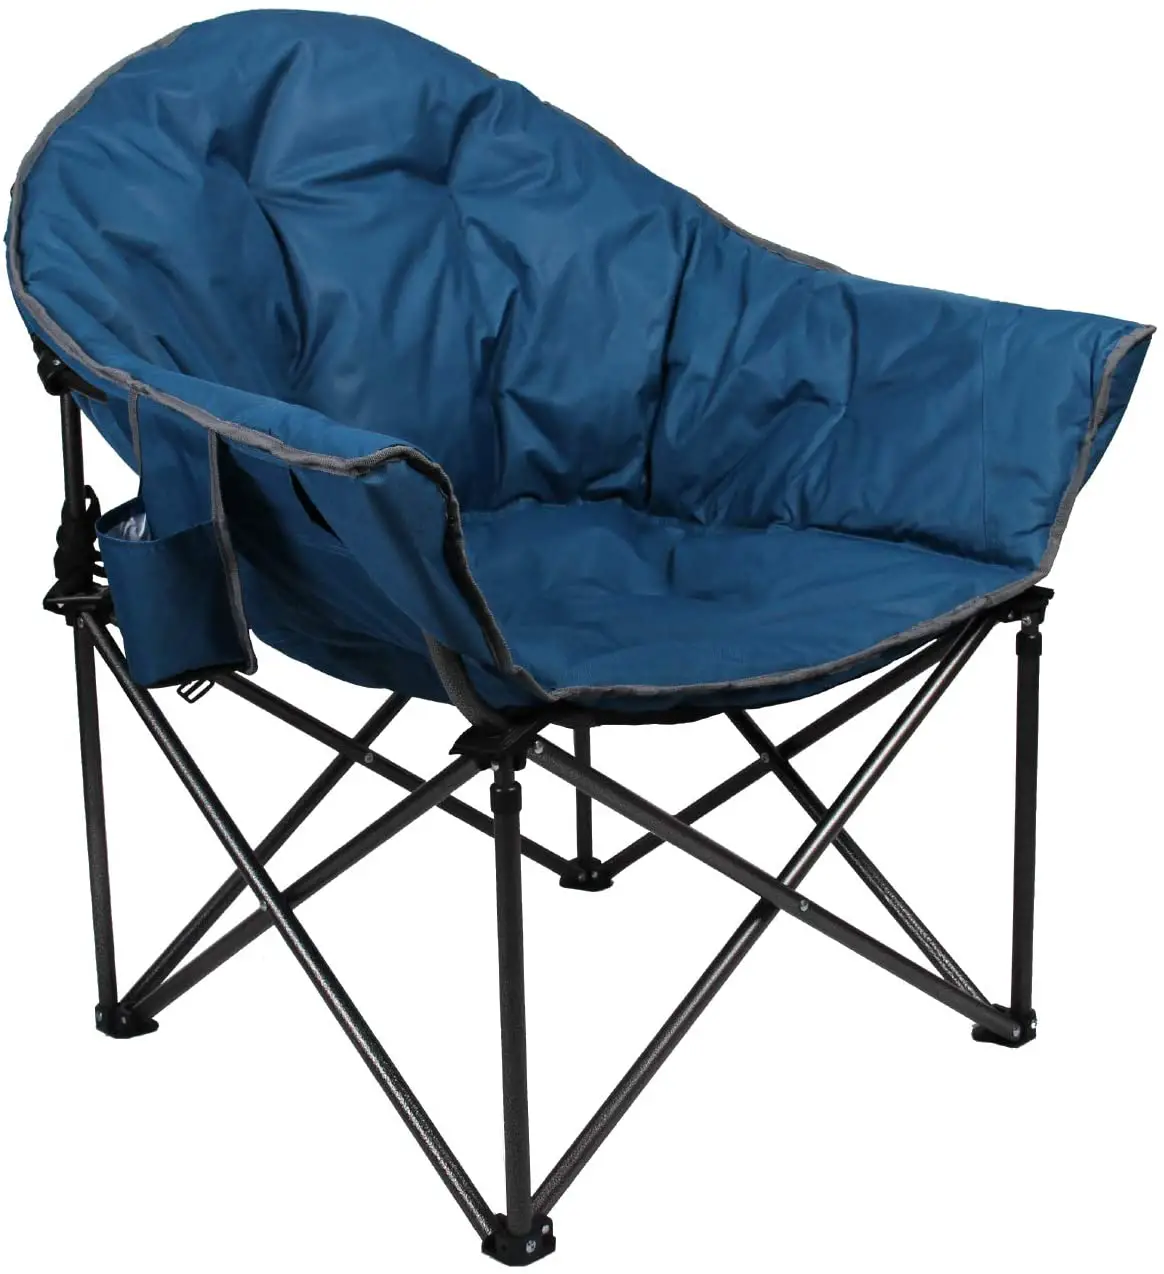 ALPHA CAMP Oversized Camping Chairs